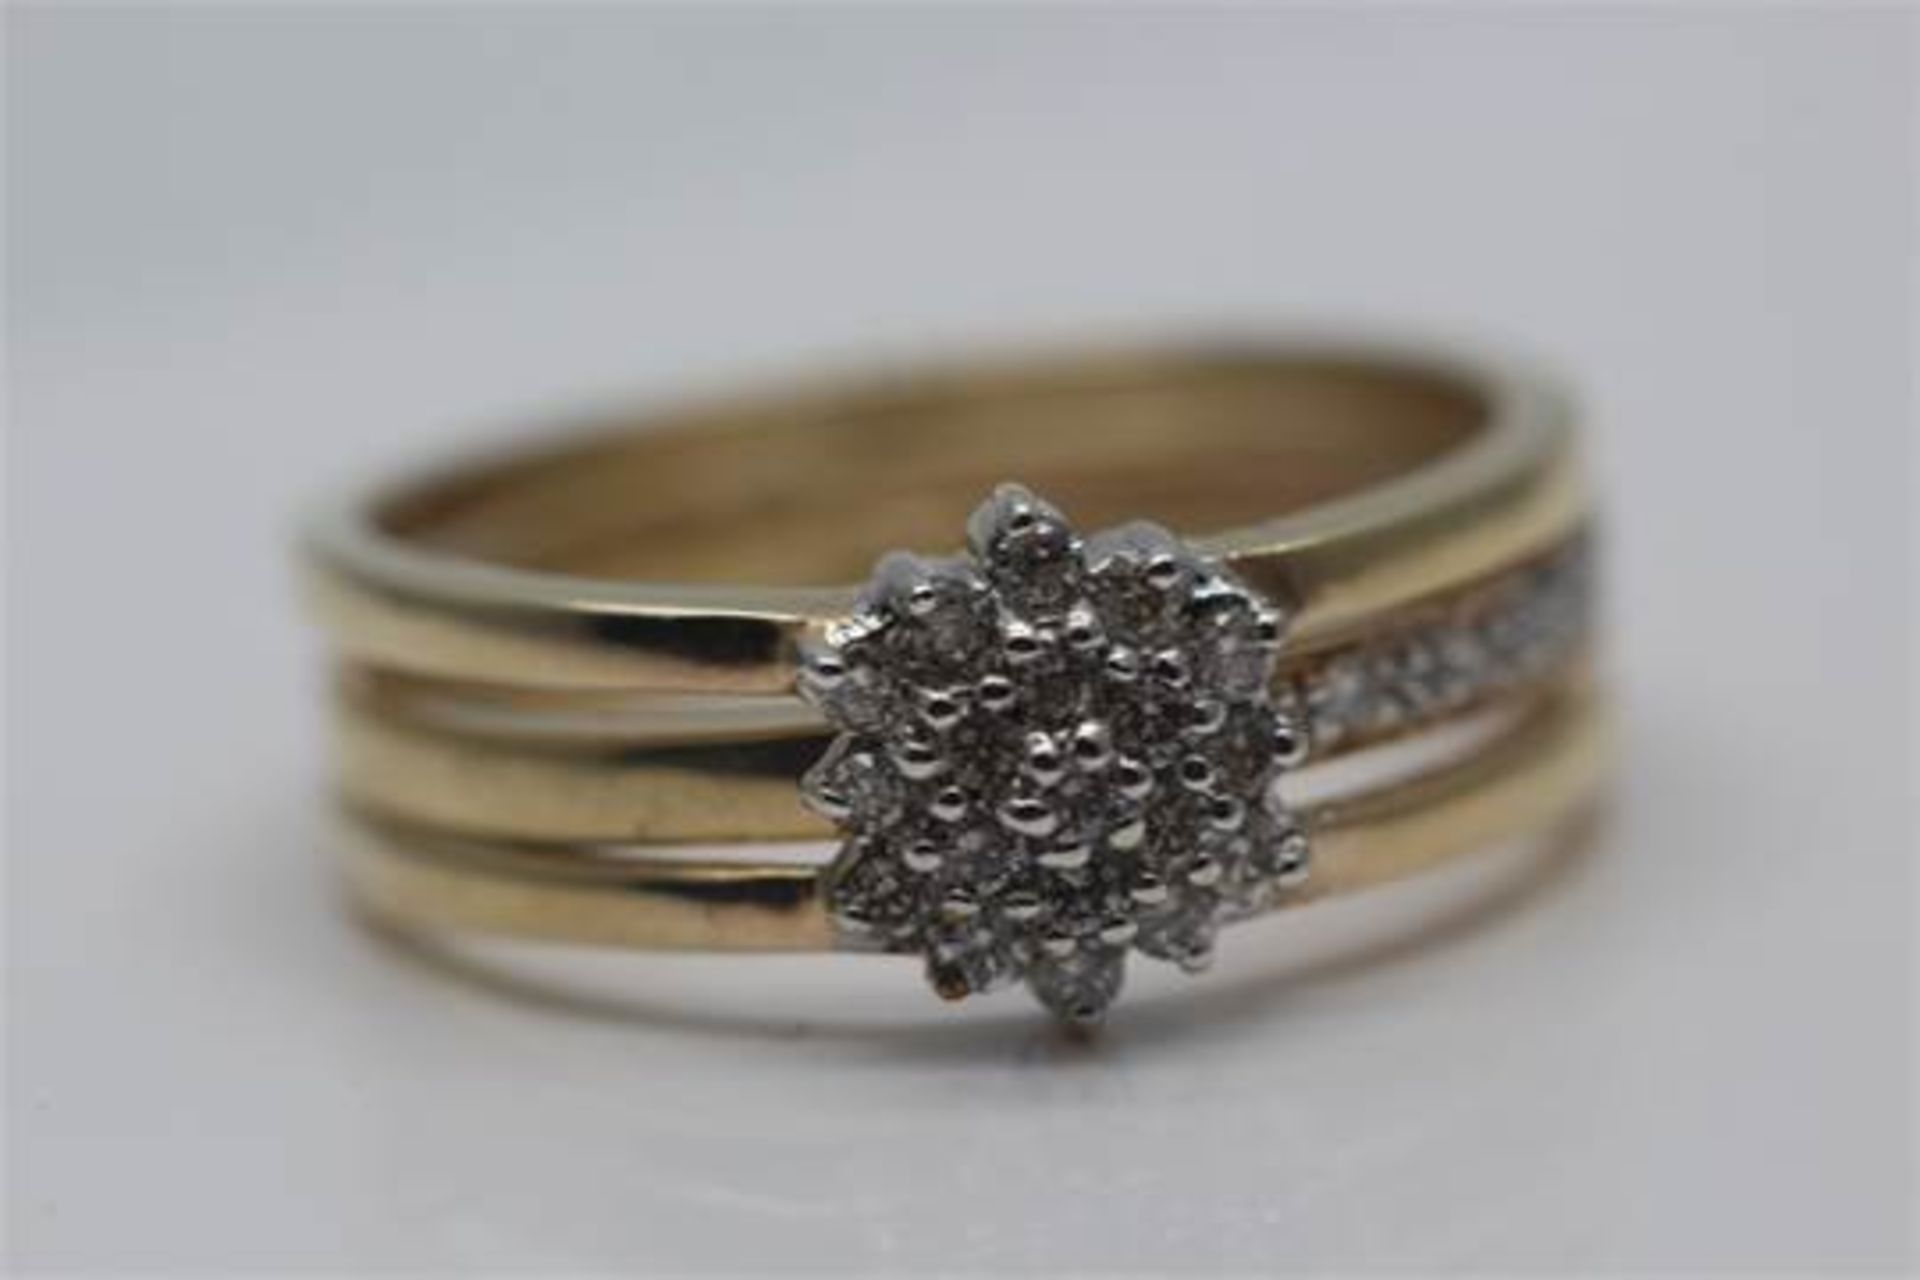 9CT YELLOW GOLD LADIES DIAMOND CLUSTER WITH DIAMOND ETERNITY RING IN THE CENTER (PV-100)